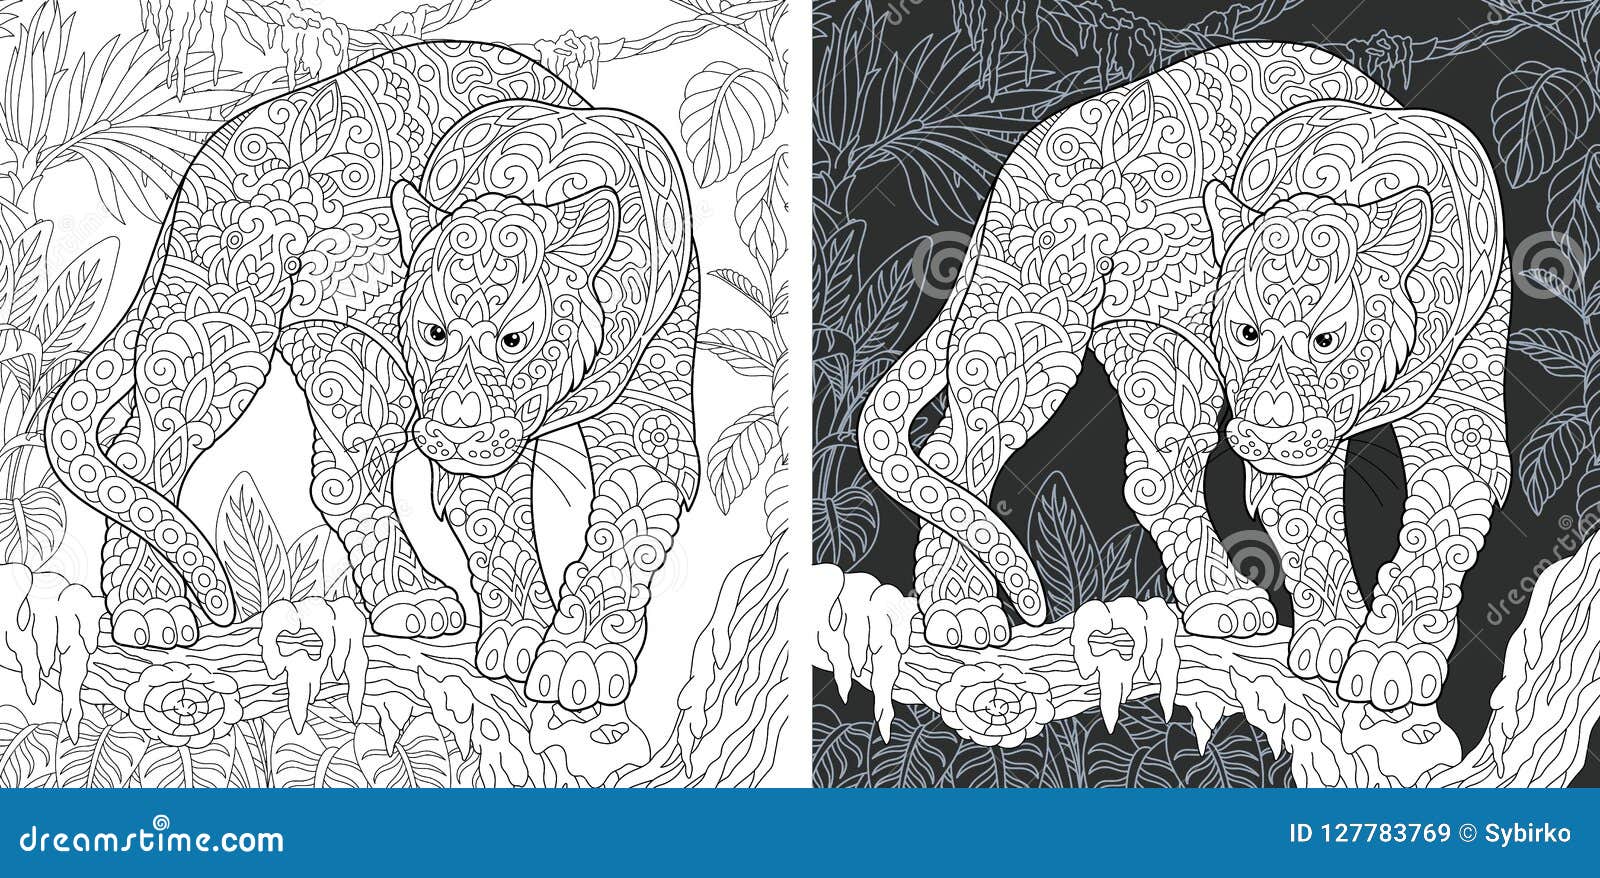 Best Easy Adult Coloring Pages Royalty-Free Images, Stock Photos